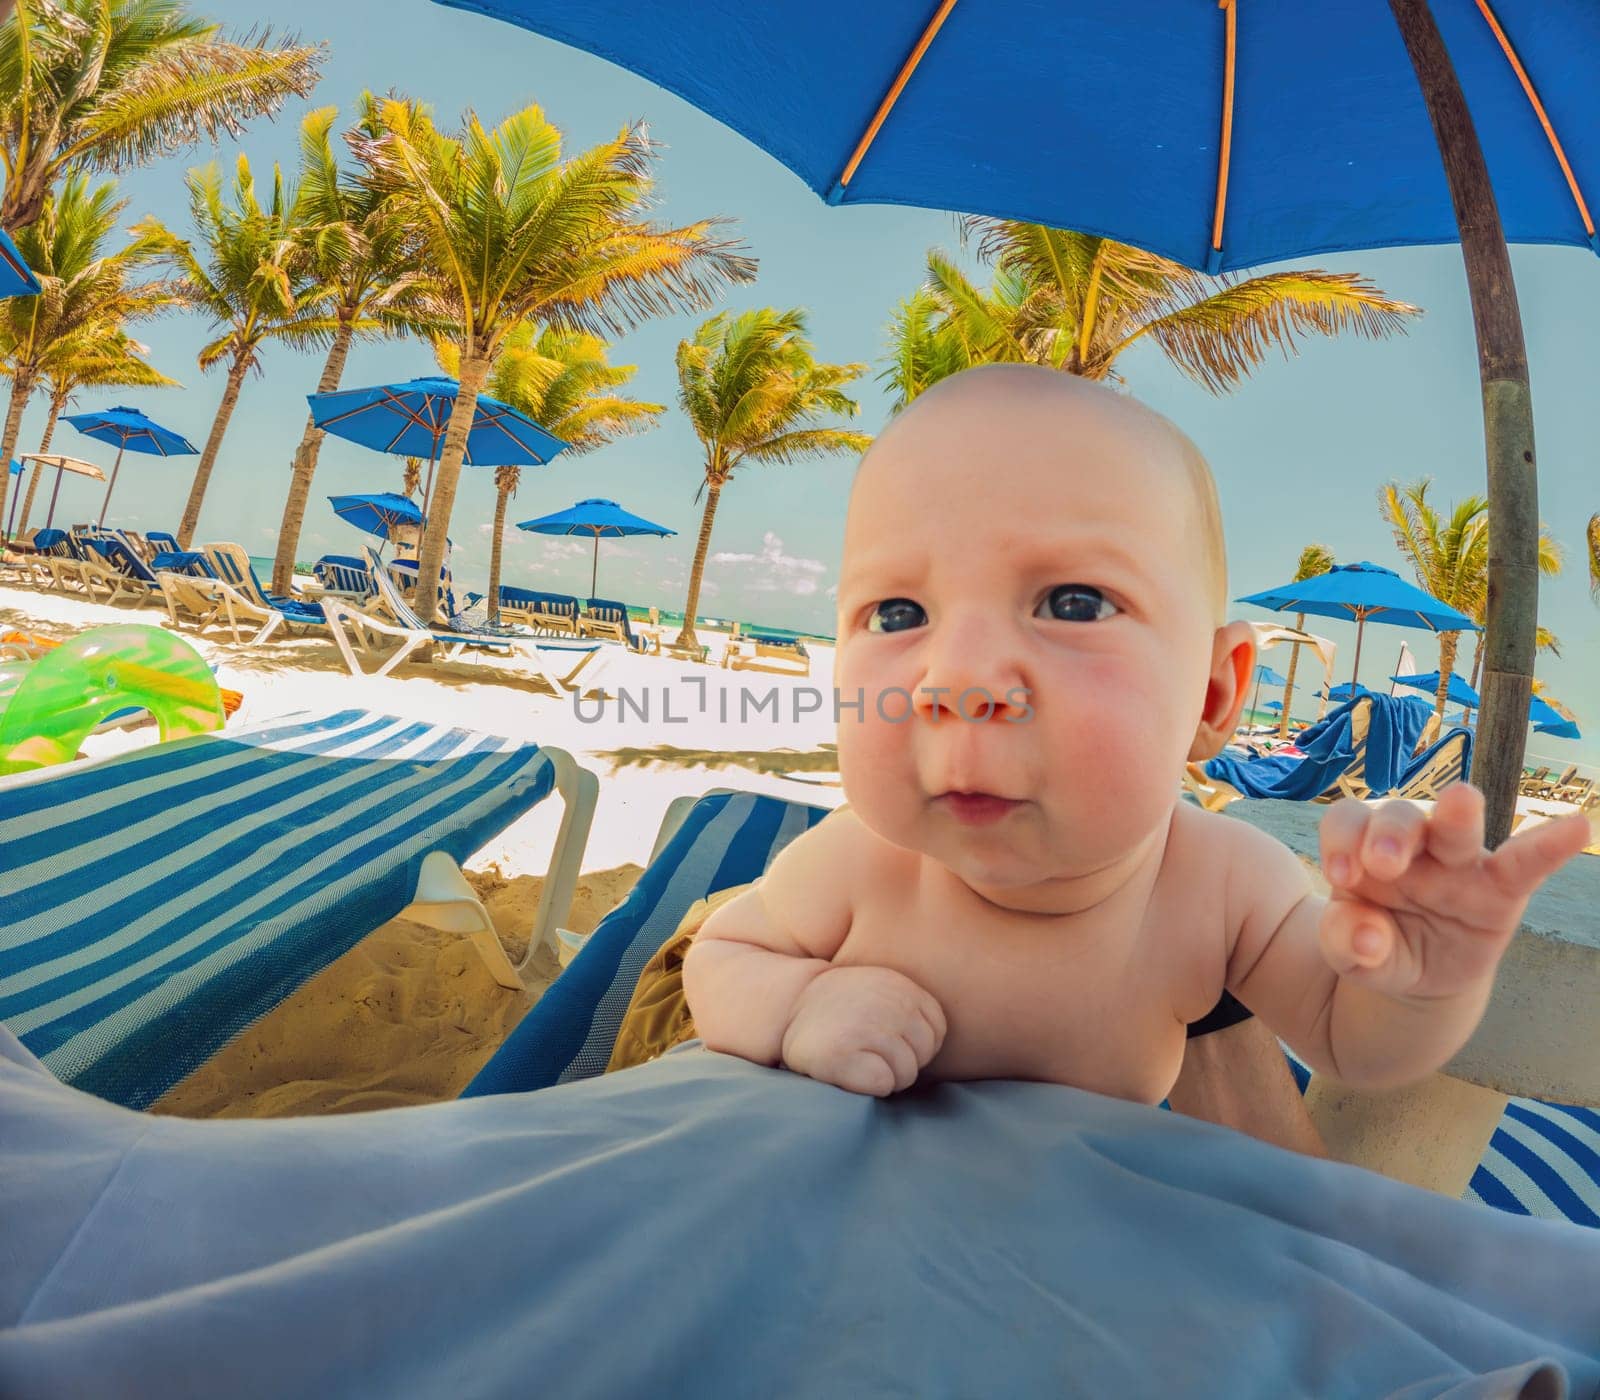 Dad and baby share a tender moment under a beach umbrella, palm trees framing their peaceful bonding by galitskaya